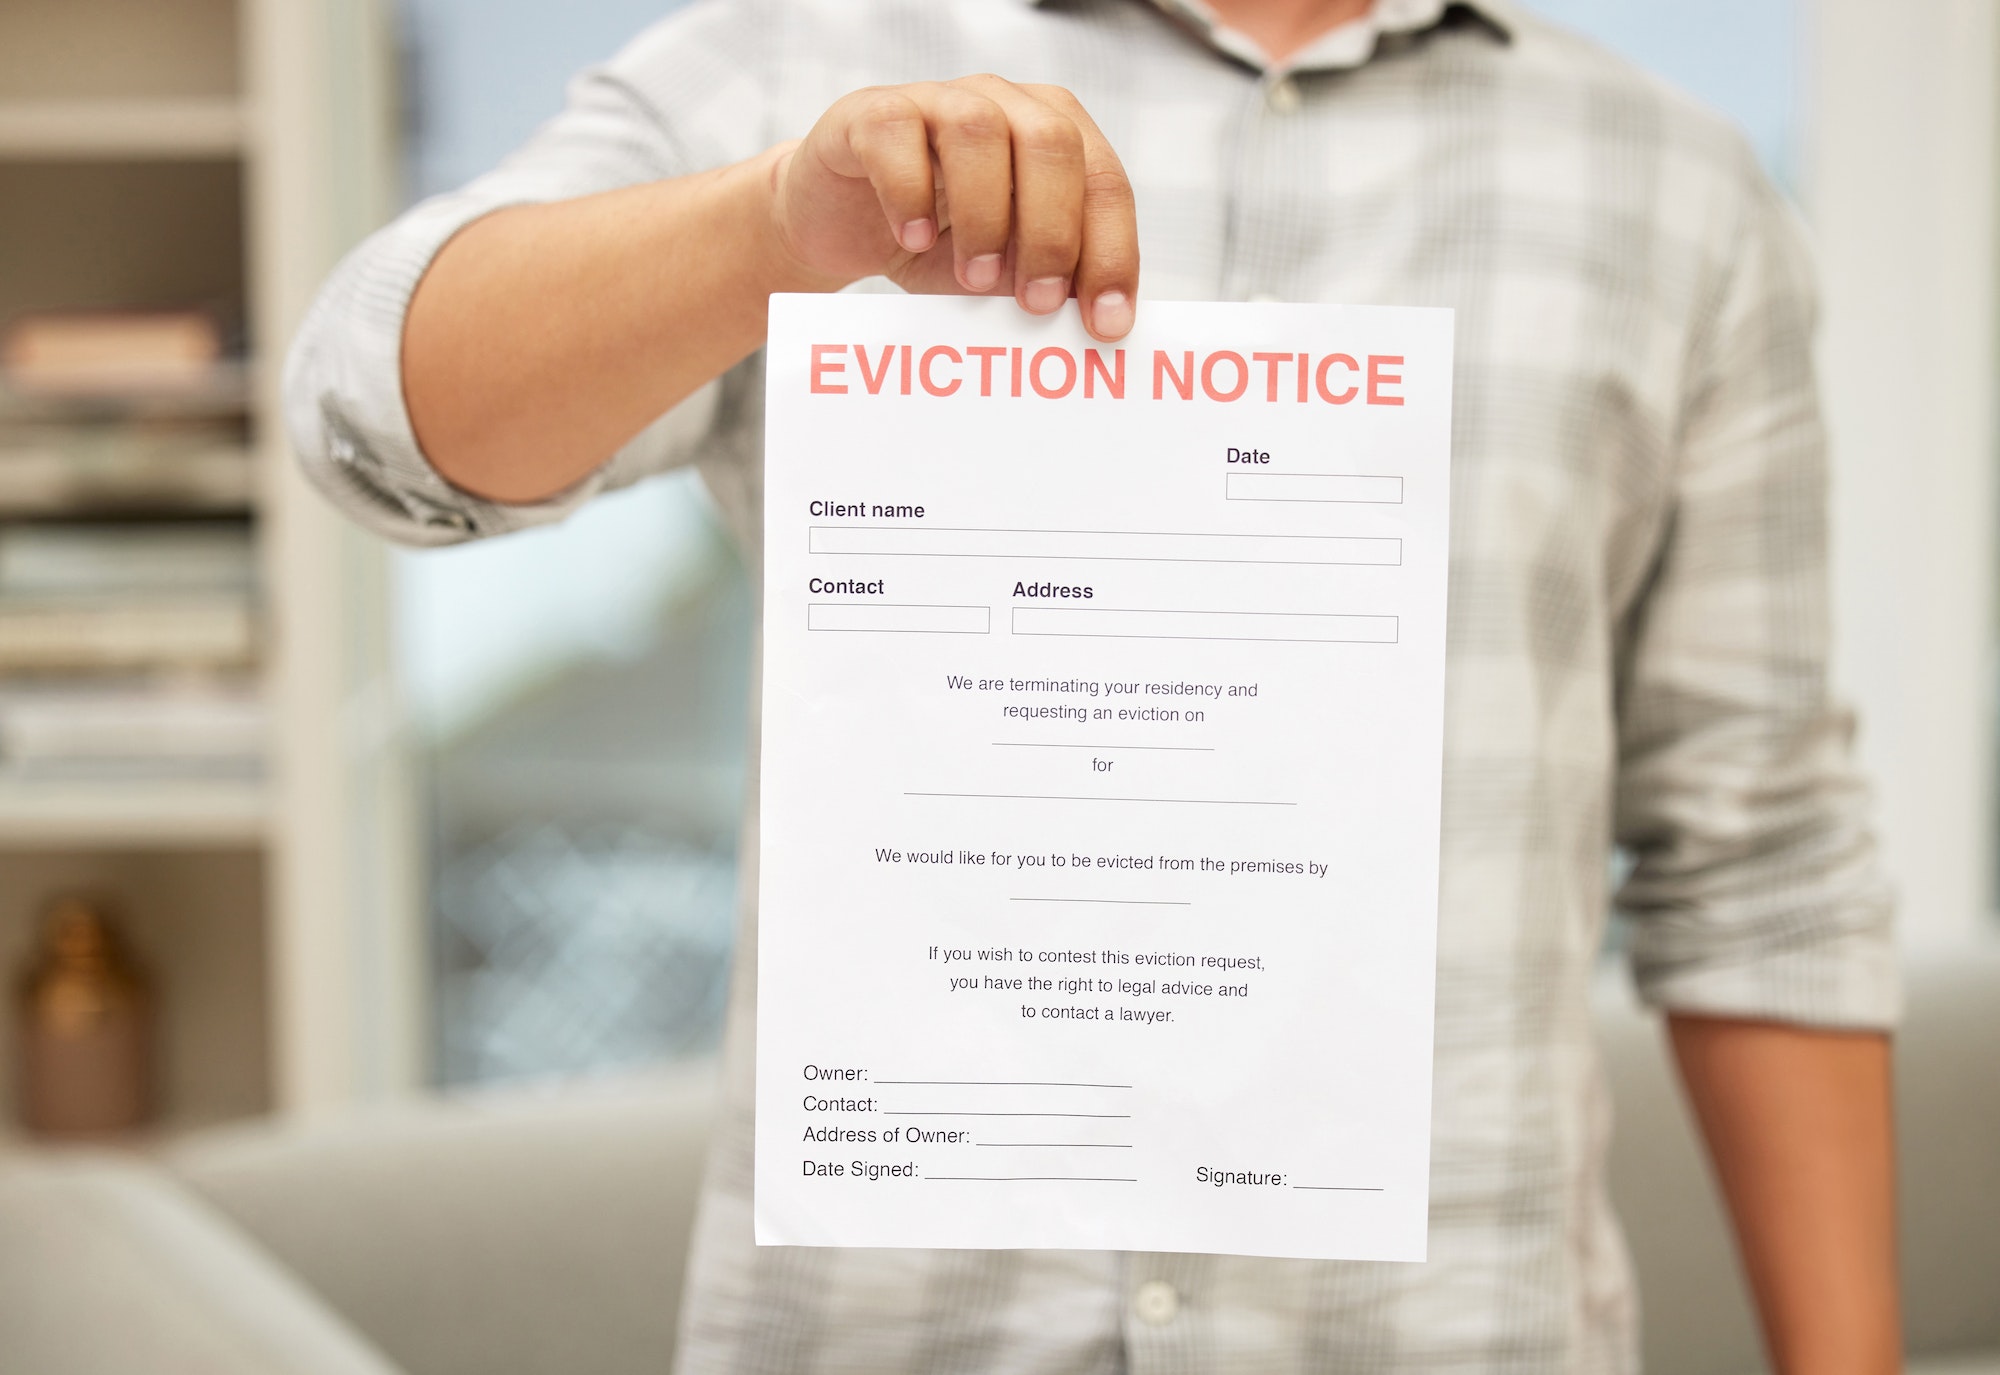 Youre outta here. Shot of an unrecognizable man holding an eviction notice.